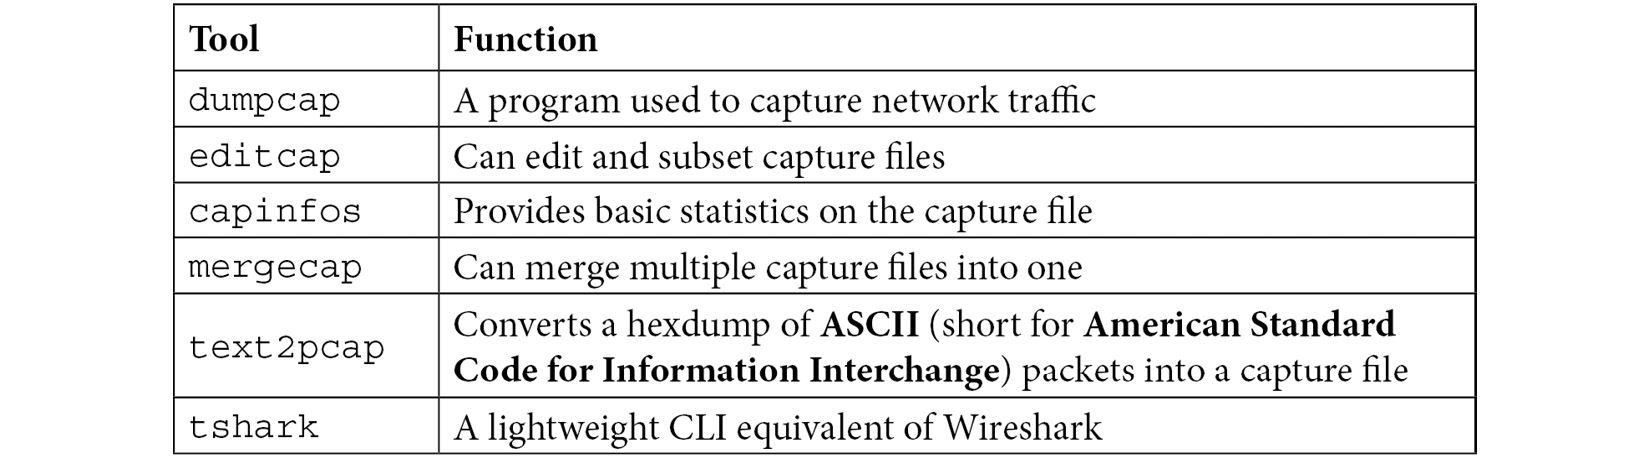 Table 2.1 – Wireshark’s built-in CLI tools
